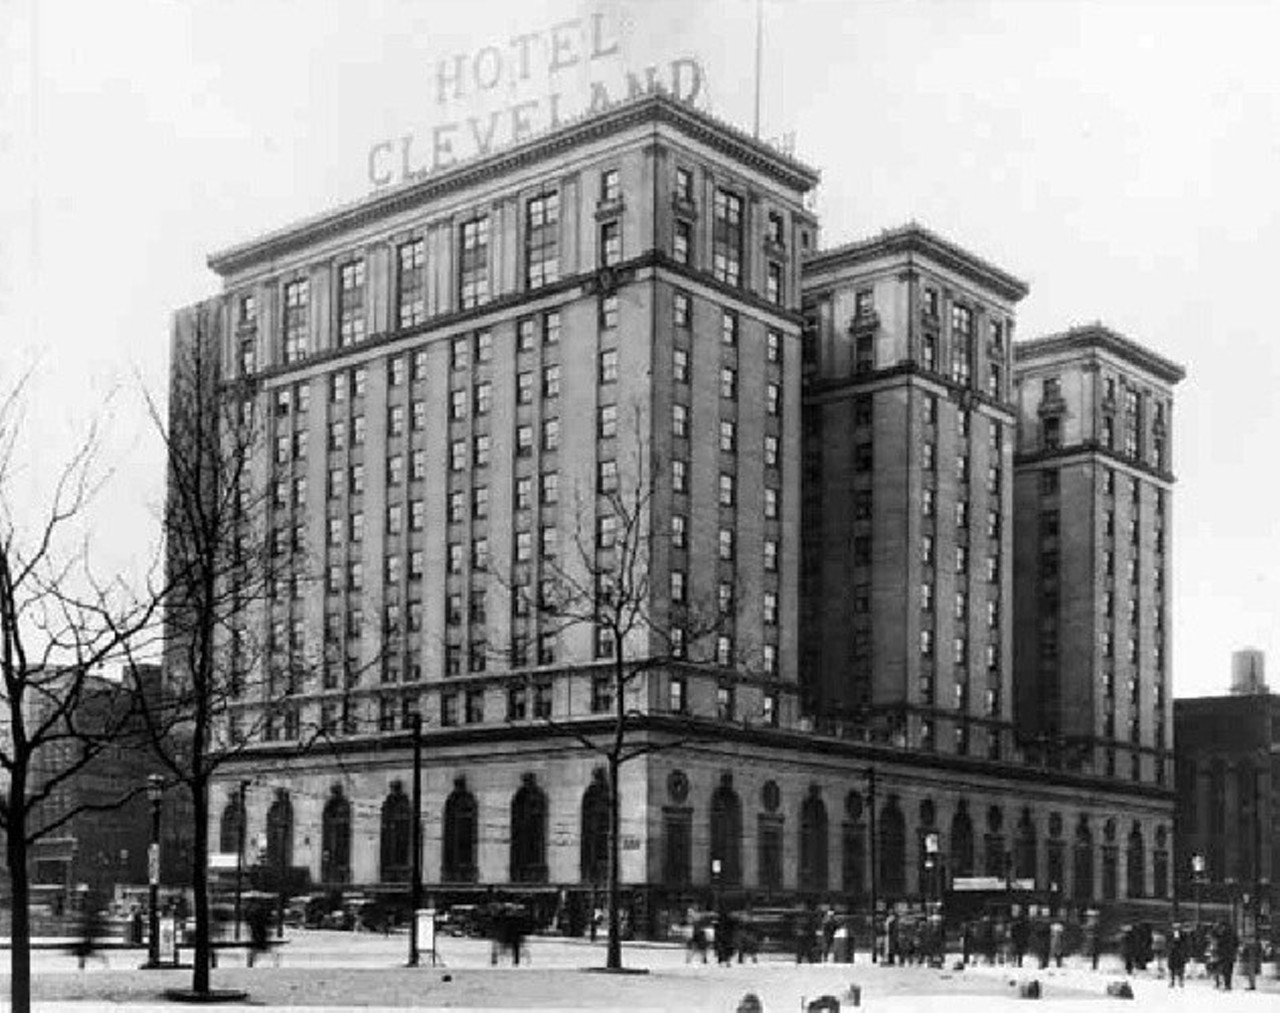 Oldest Hotel: Renaissance Cleveland Hotel (105 Years Old) 
First opened as Hotel Cleveland, this luxury mainstay has been around longer than most. With prime Tower City real estate, the Renaissance proves popular with locals and tourists alike. Aligned with Public Square, the Renaissance has solidified itself as both a modern getaway and a Cleveland landmark.
Photo via Scene Archives